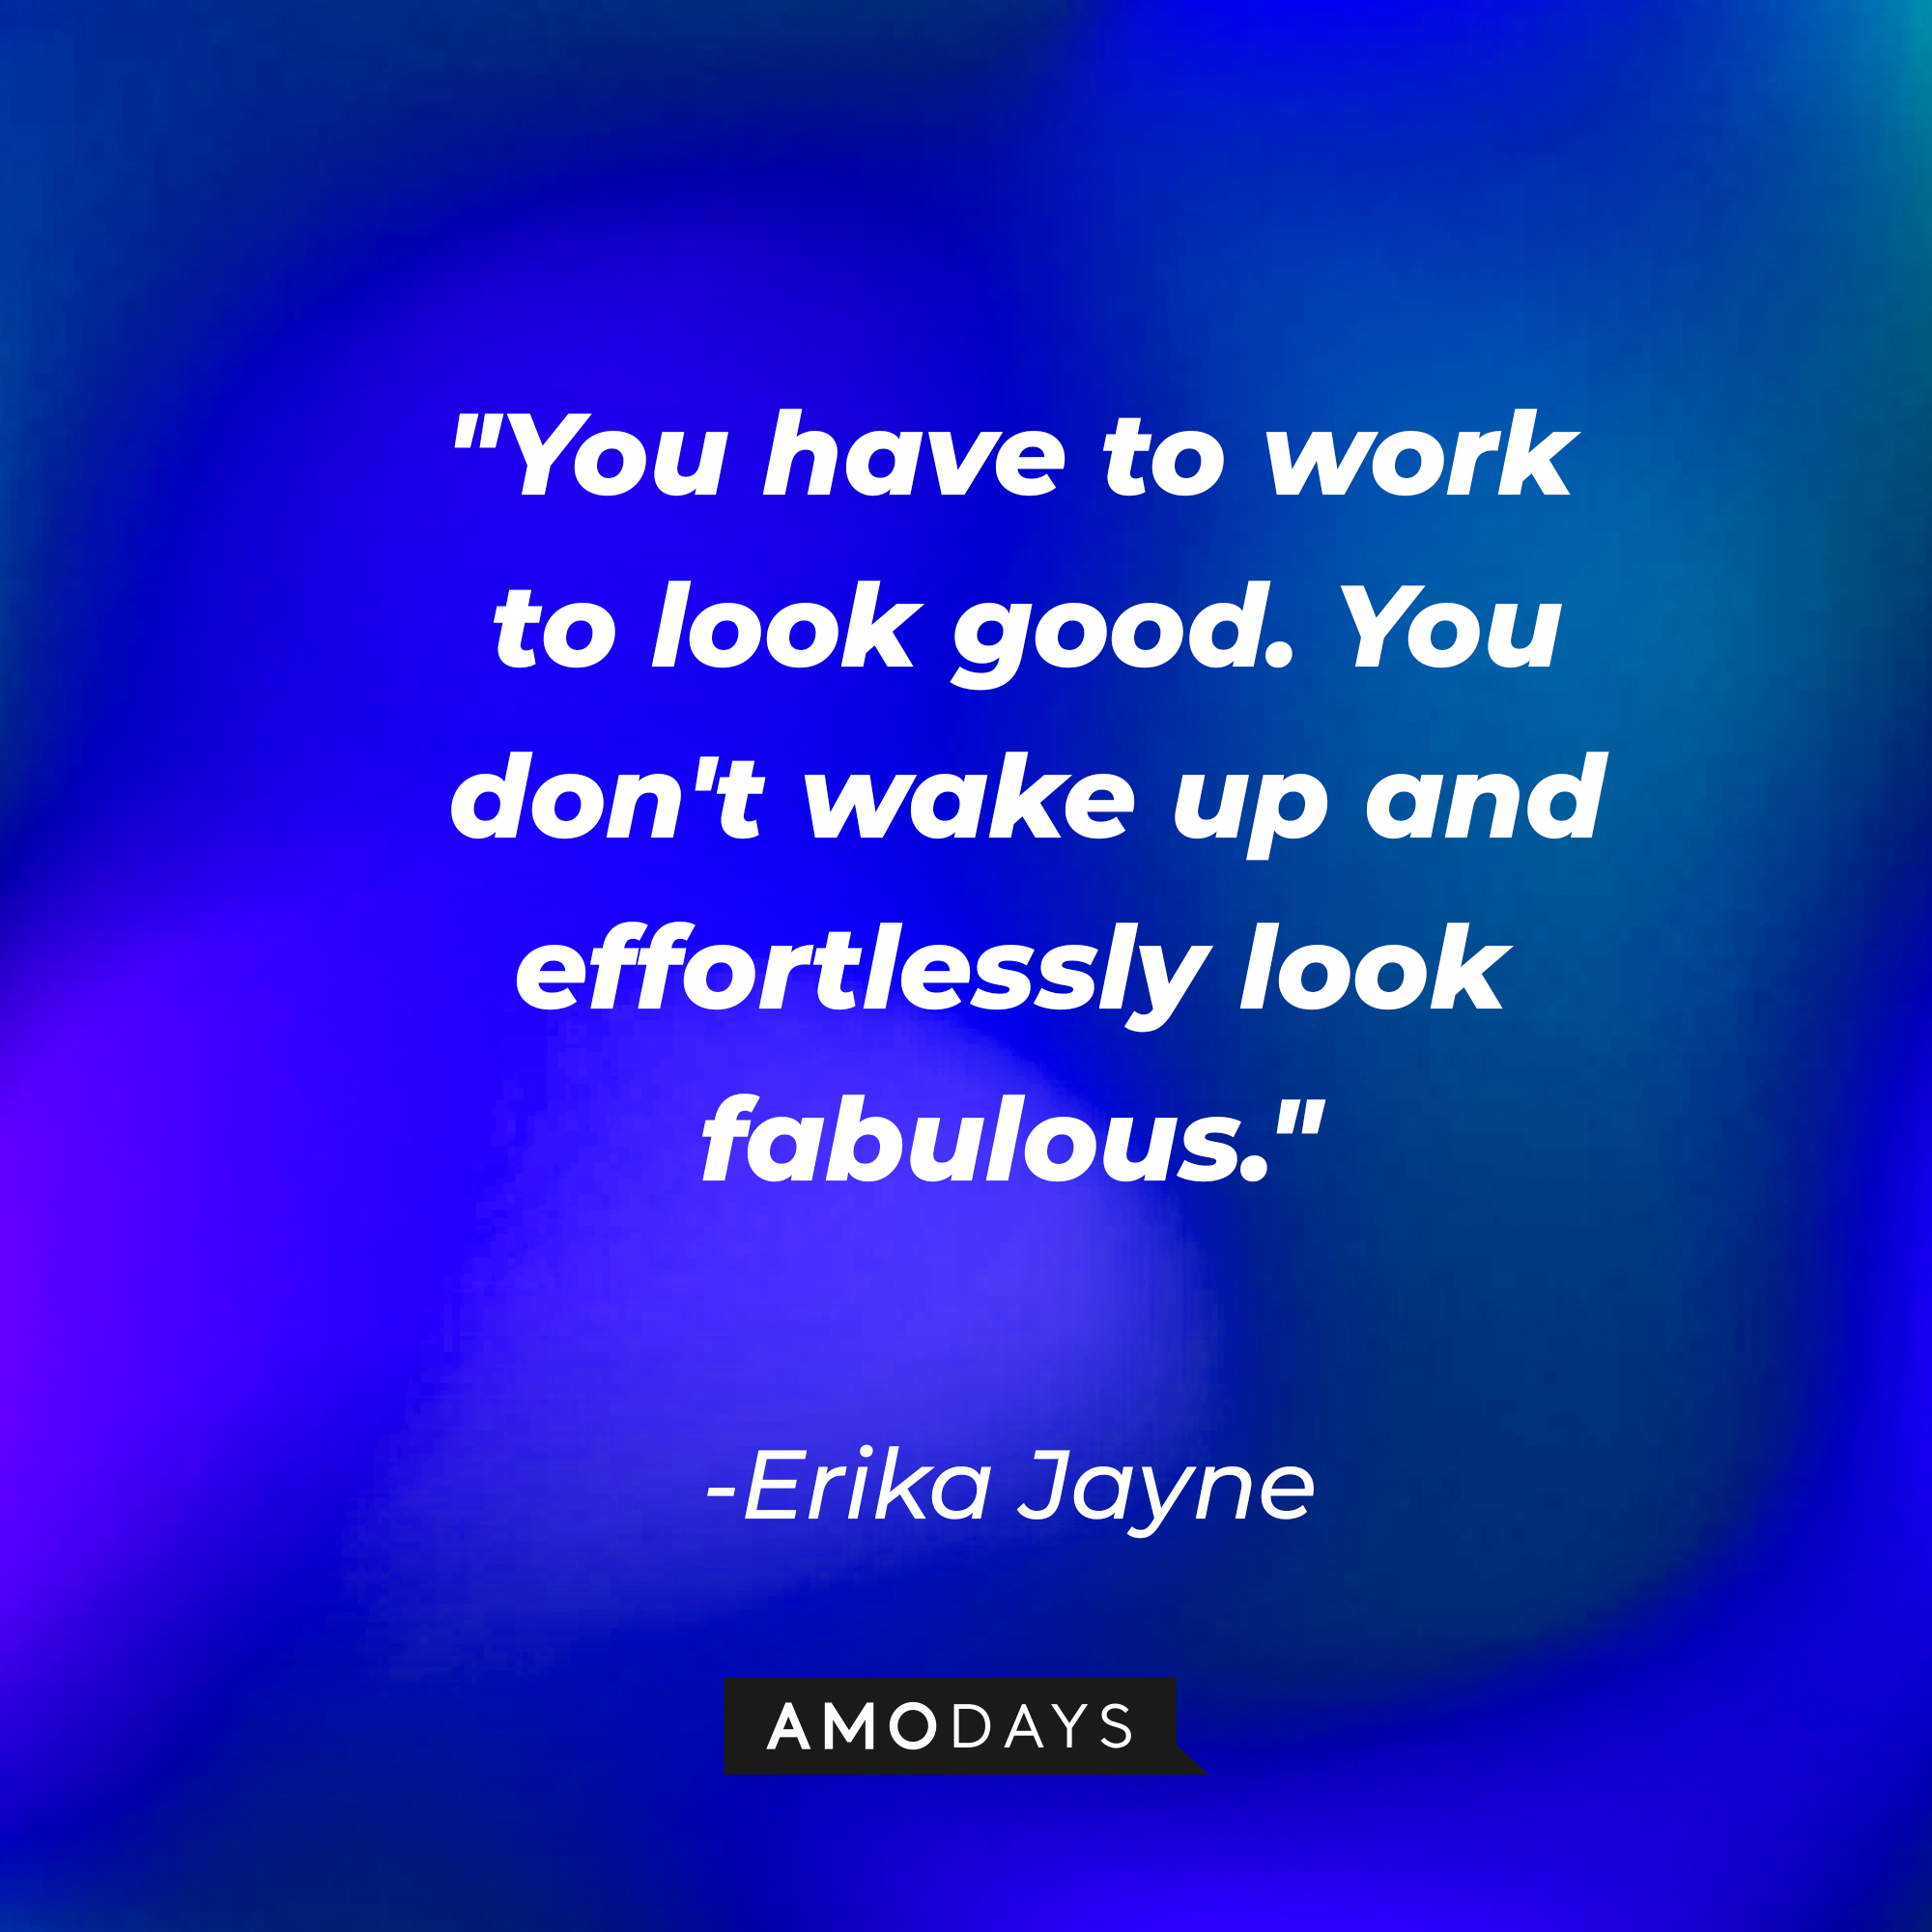 Erika Jayne’s quote: "You have to work to look good. You don't wake up and effortlessly look fabulous." | Image: Amodays